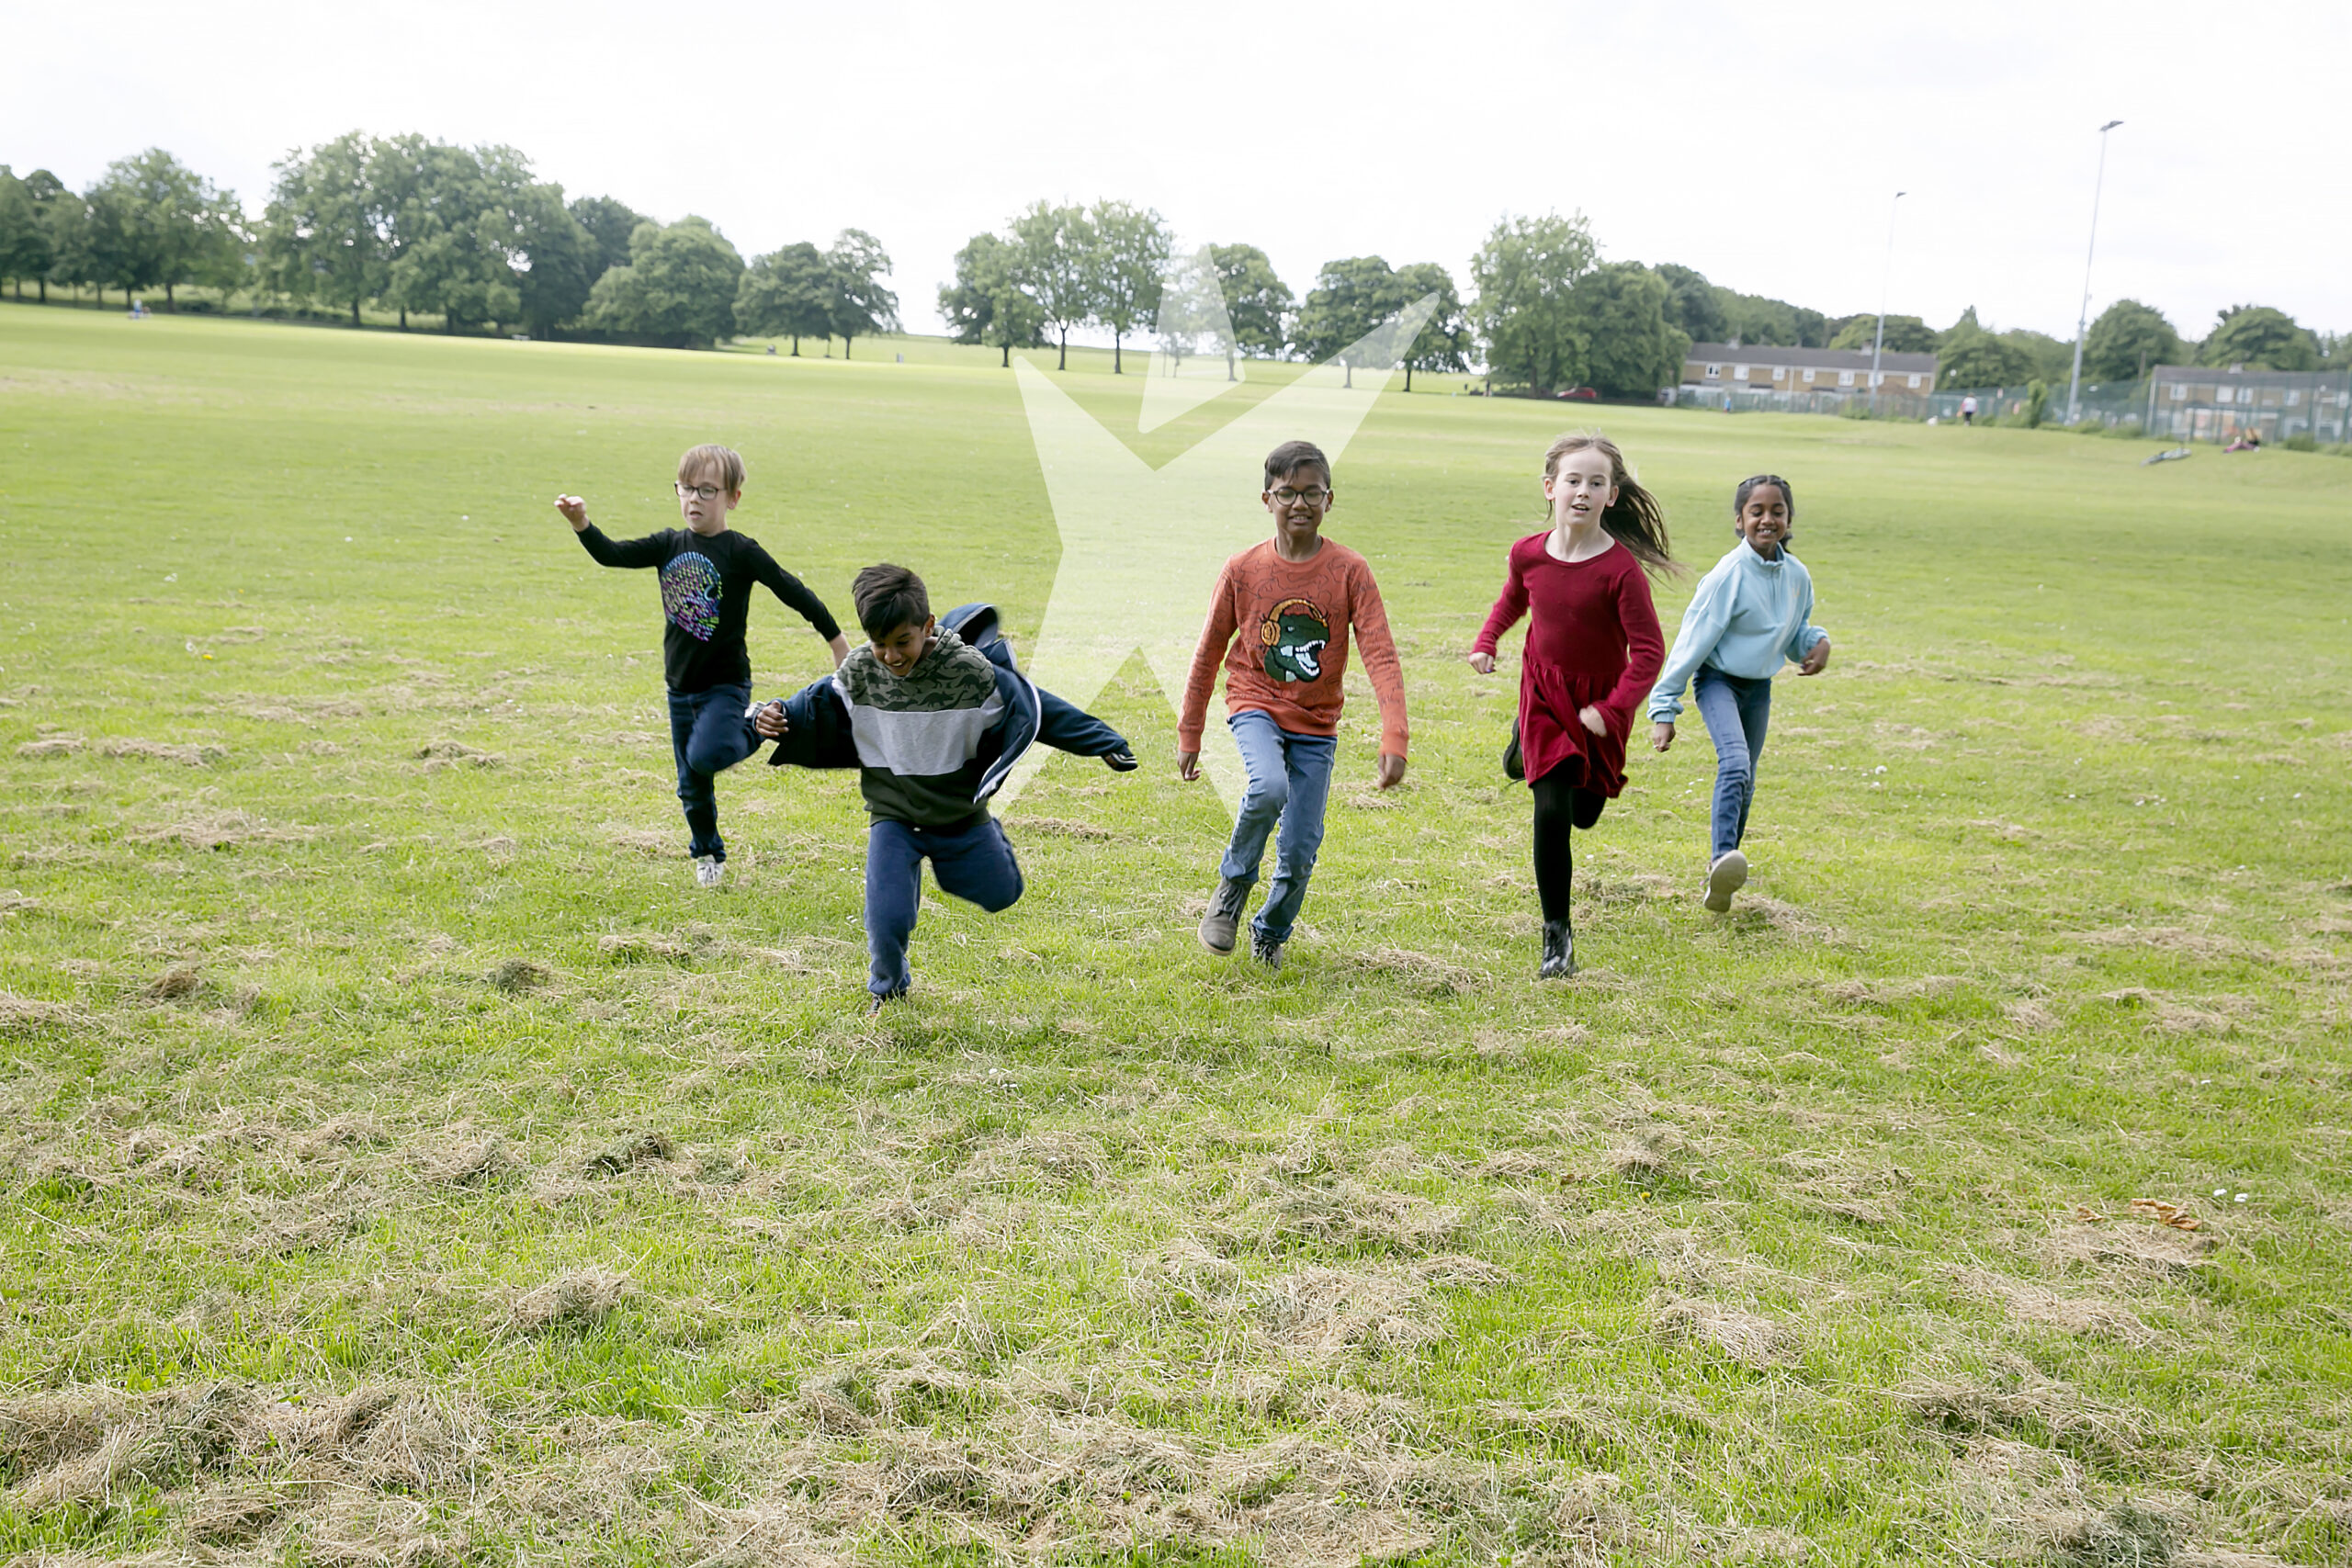 A group of children in a field, running and playing.